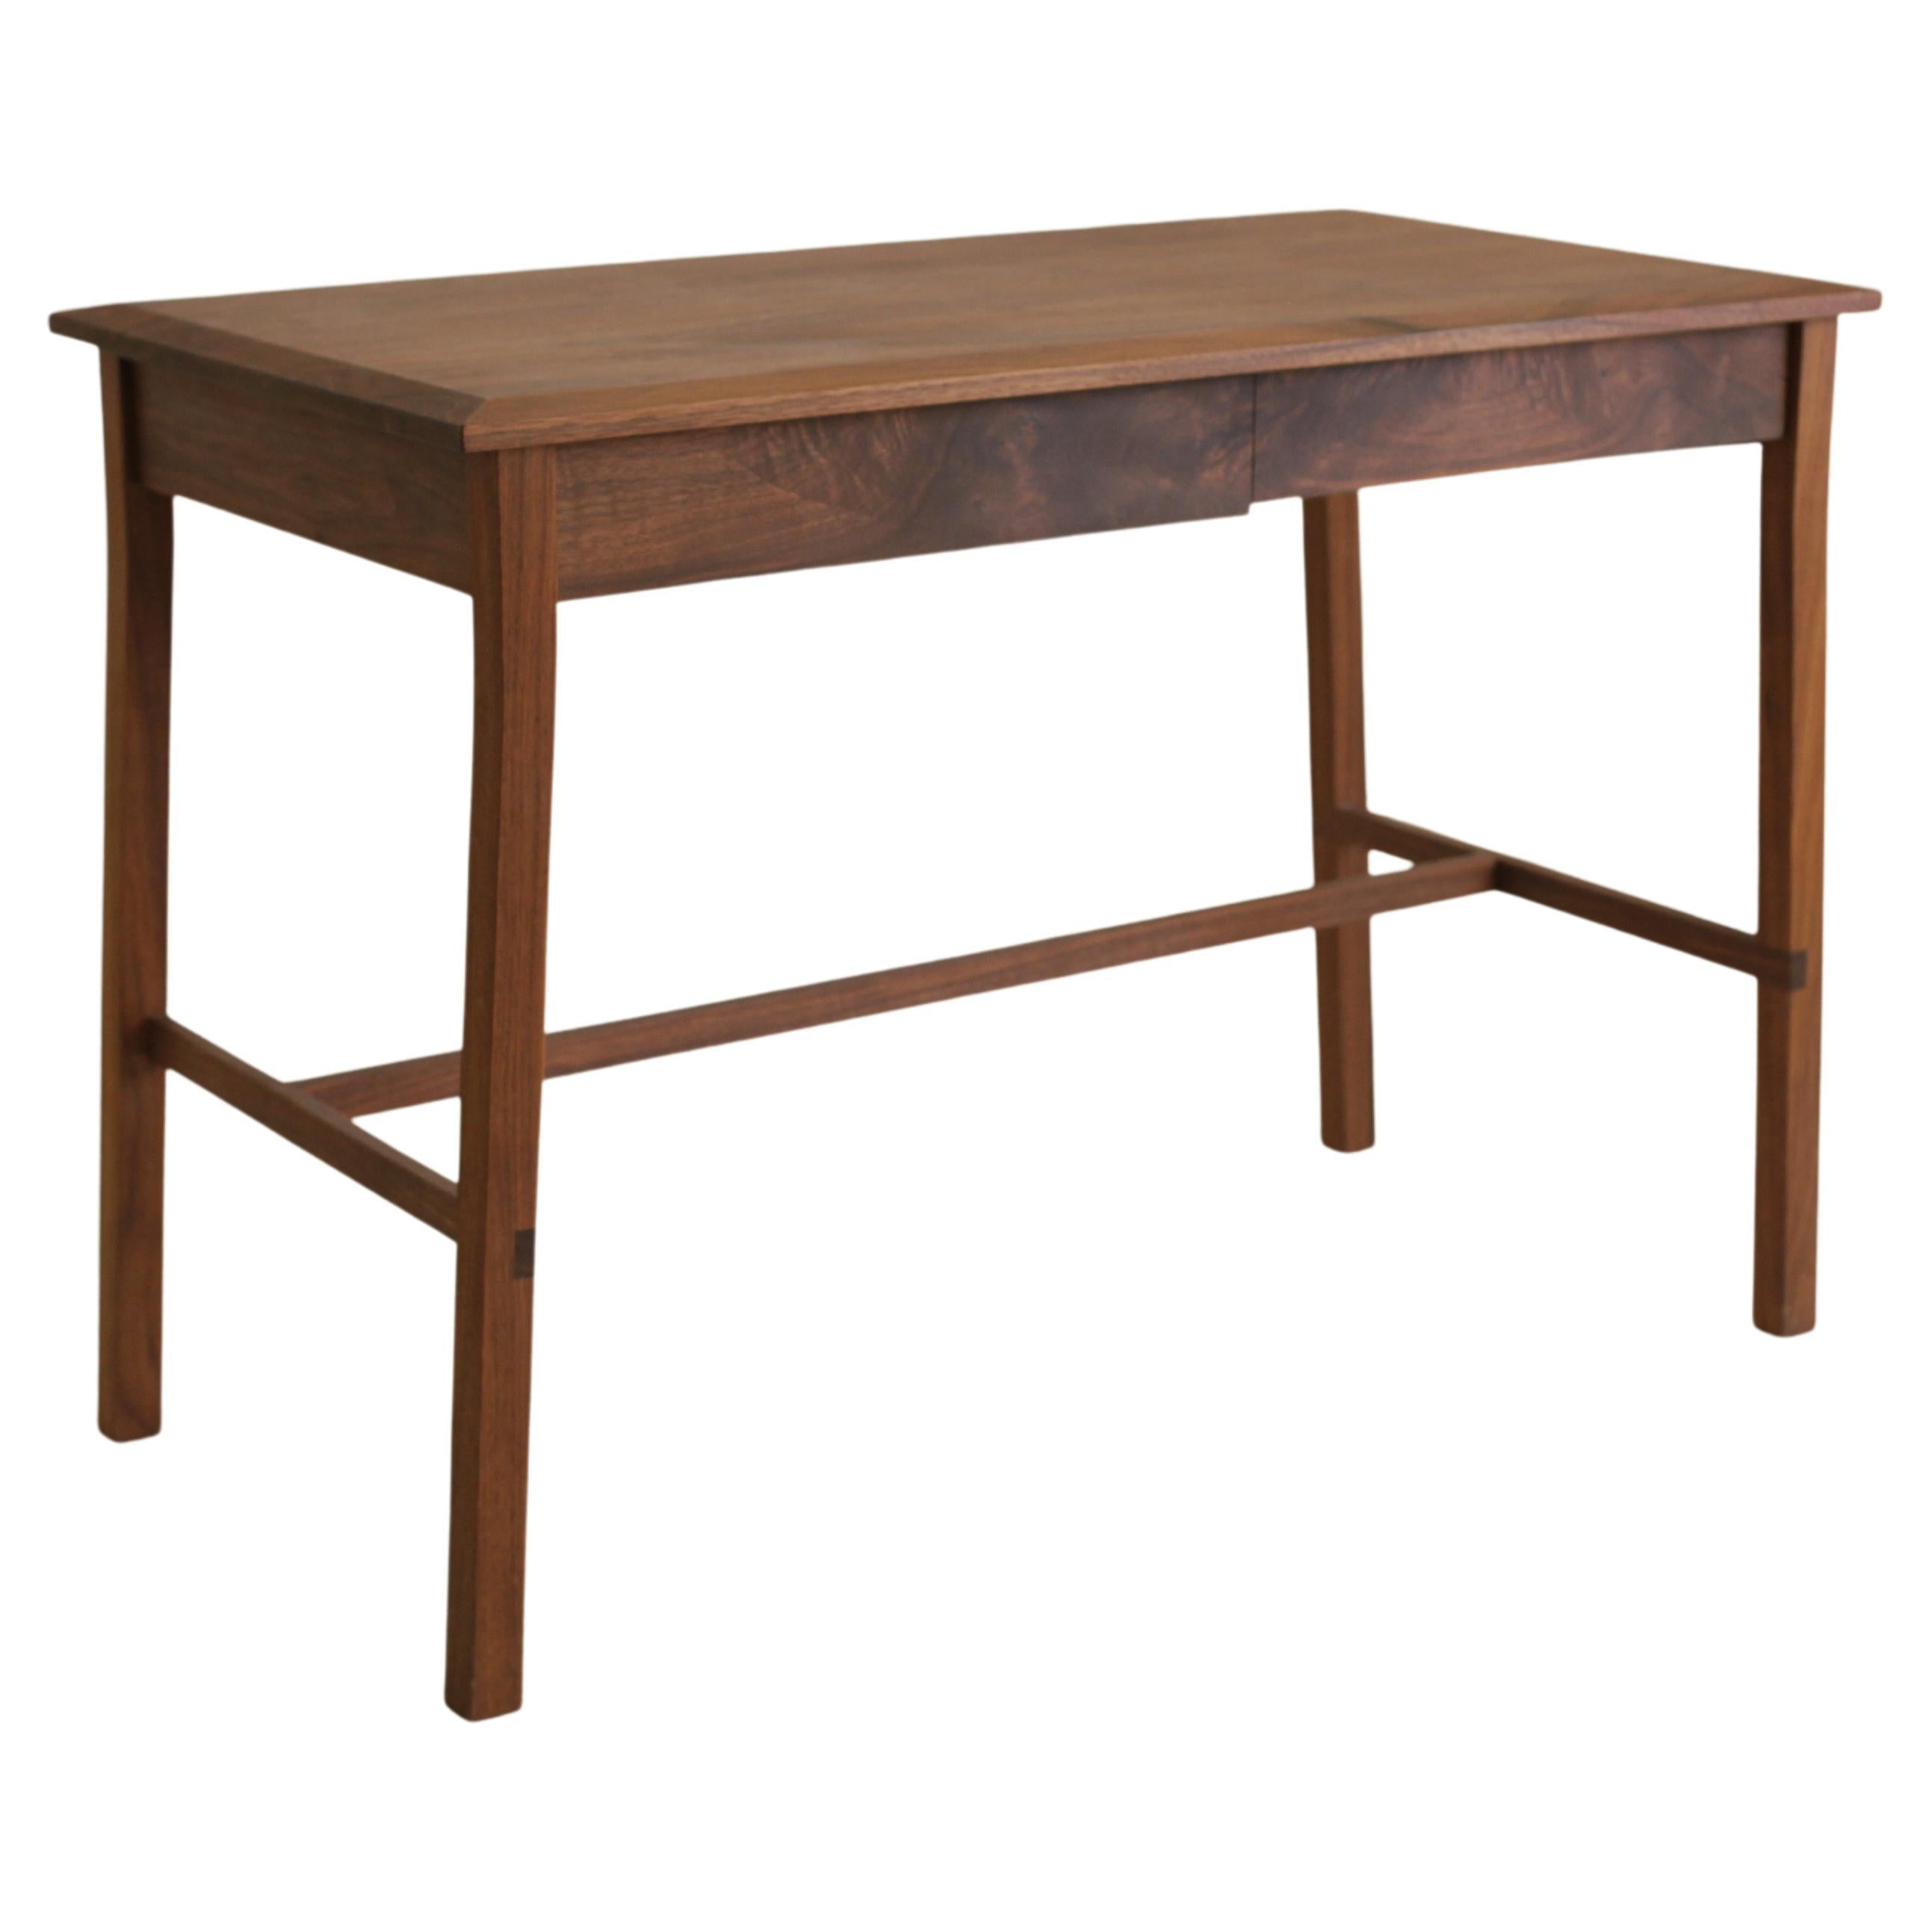 This writing desk in solid walnut was originally made as a gift for my daughter on her 13th birthday. I designed it to be elegant, simple and timeless; something that could fit seamlessly into her various homes as she moves through life. The